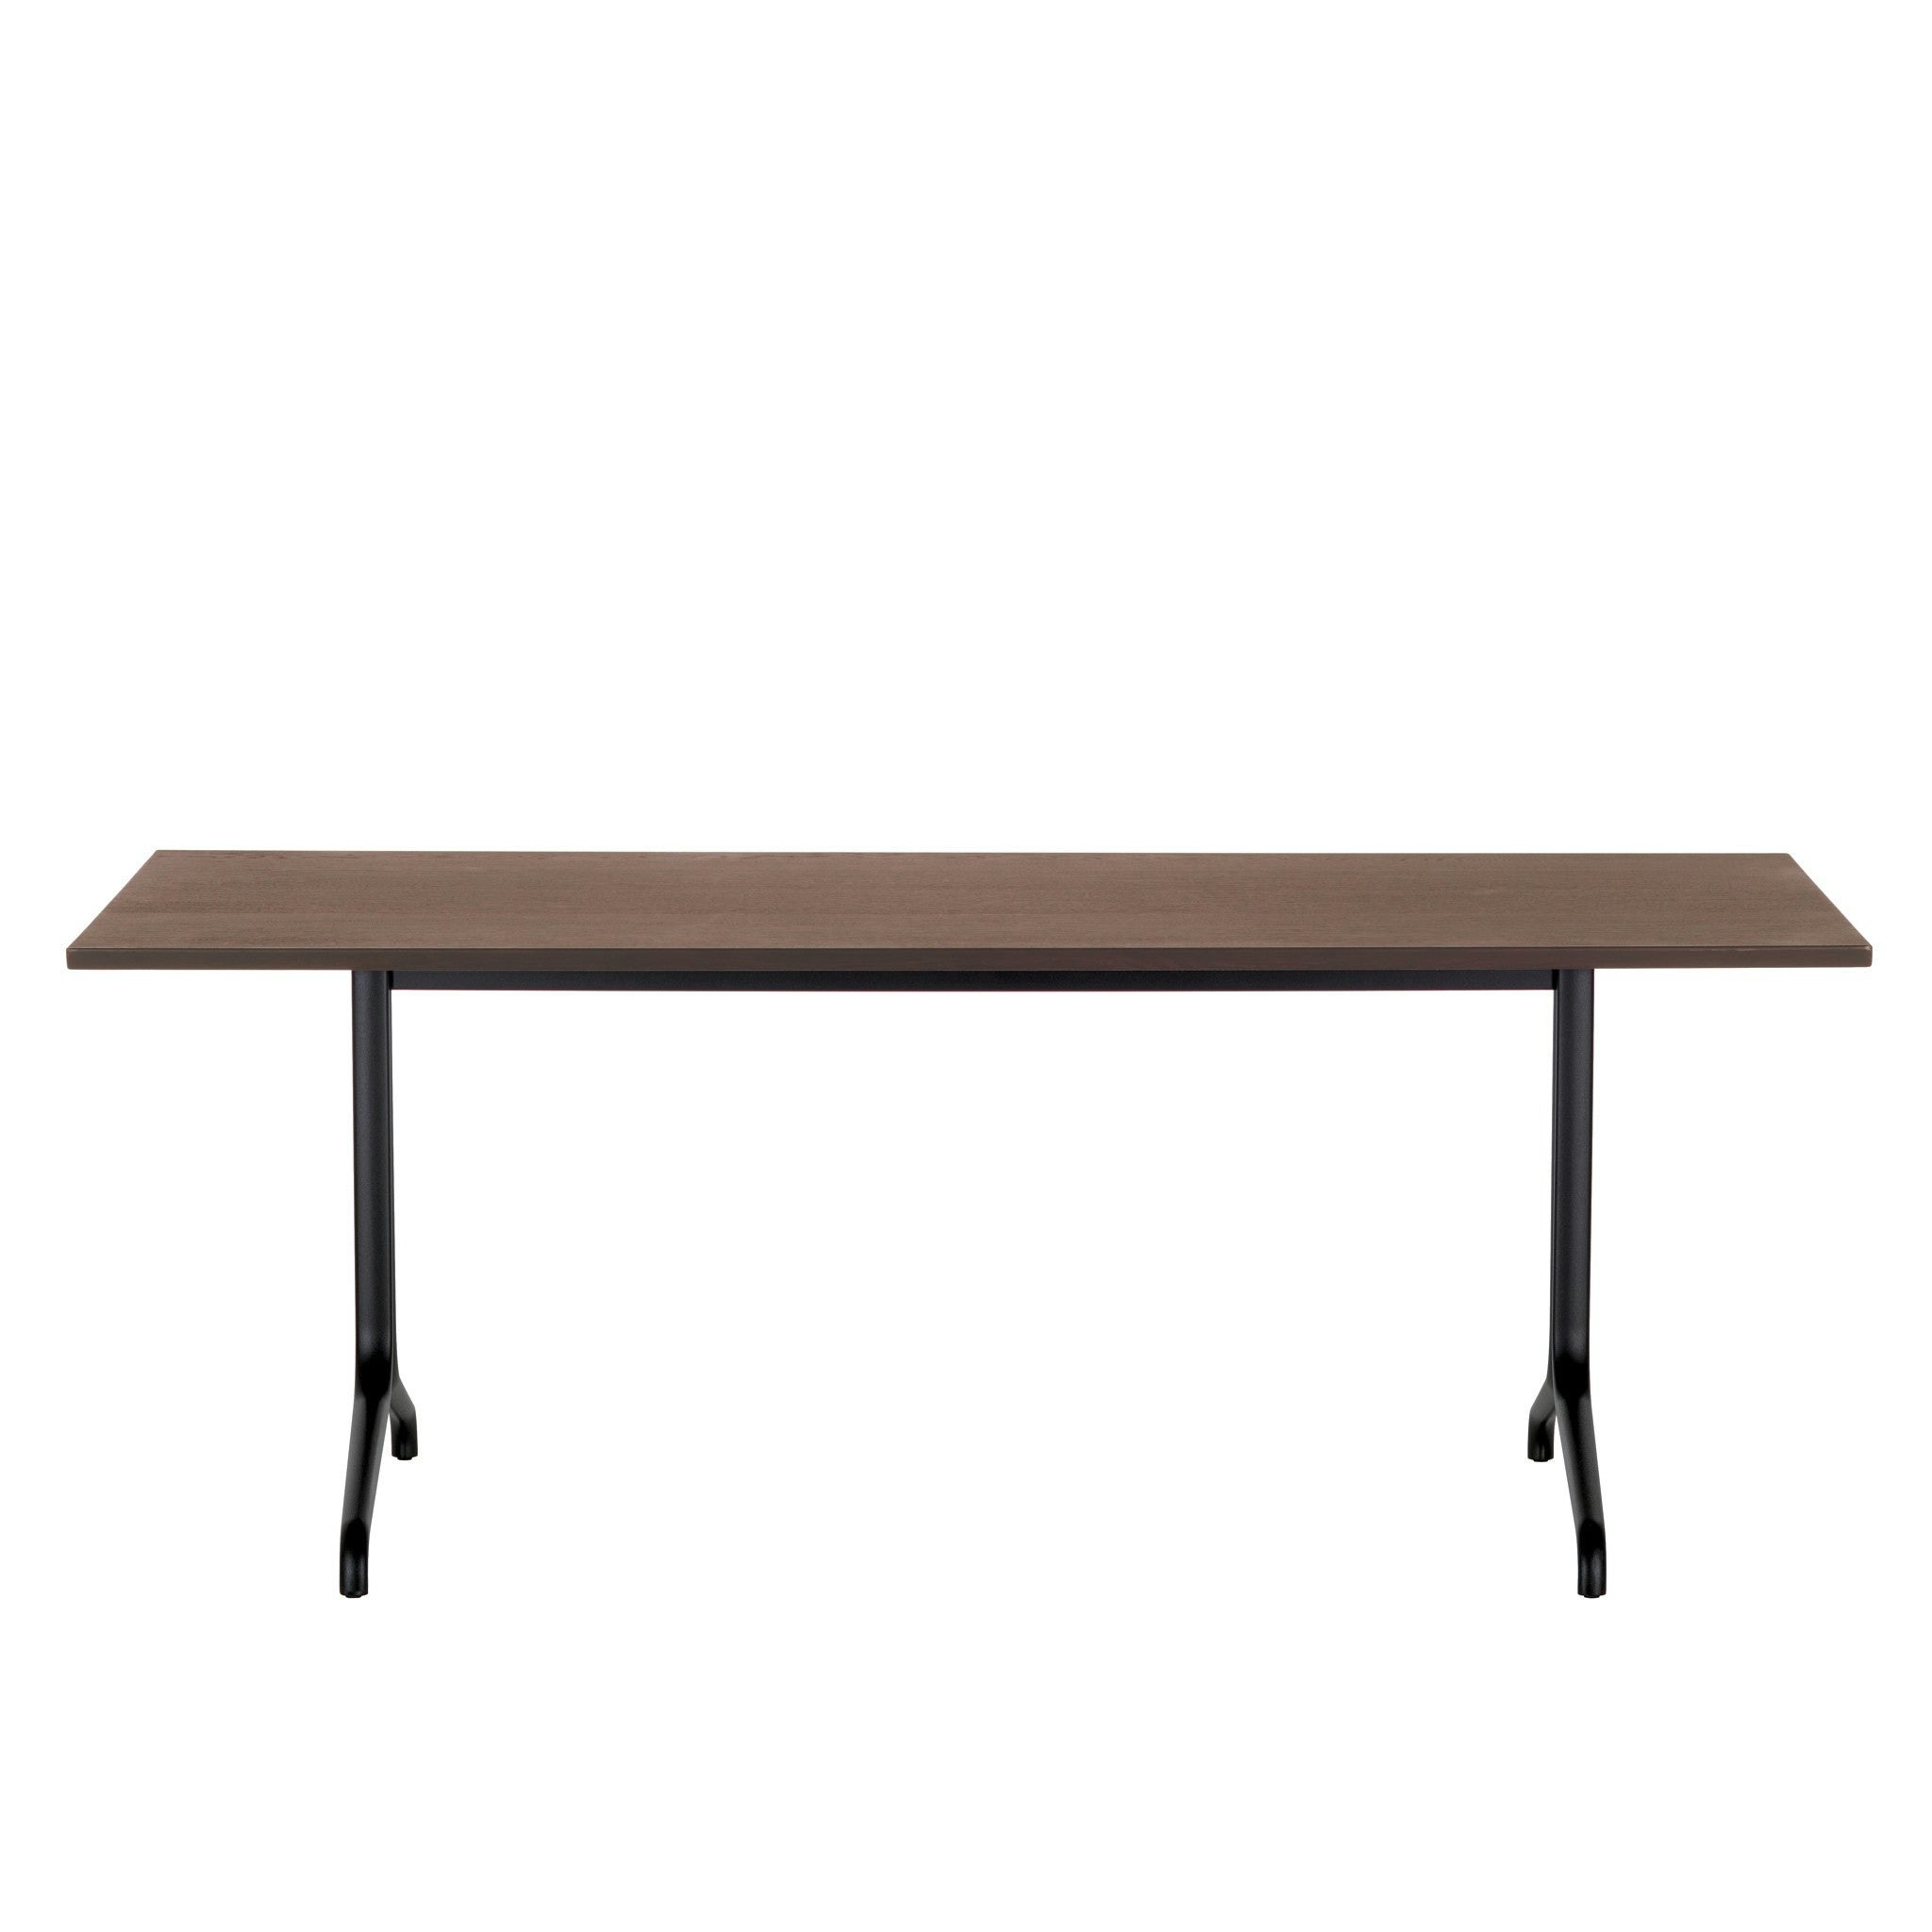 Belleville Indoor Table by Vitra